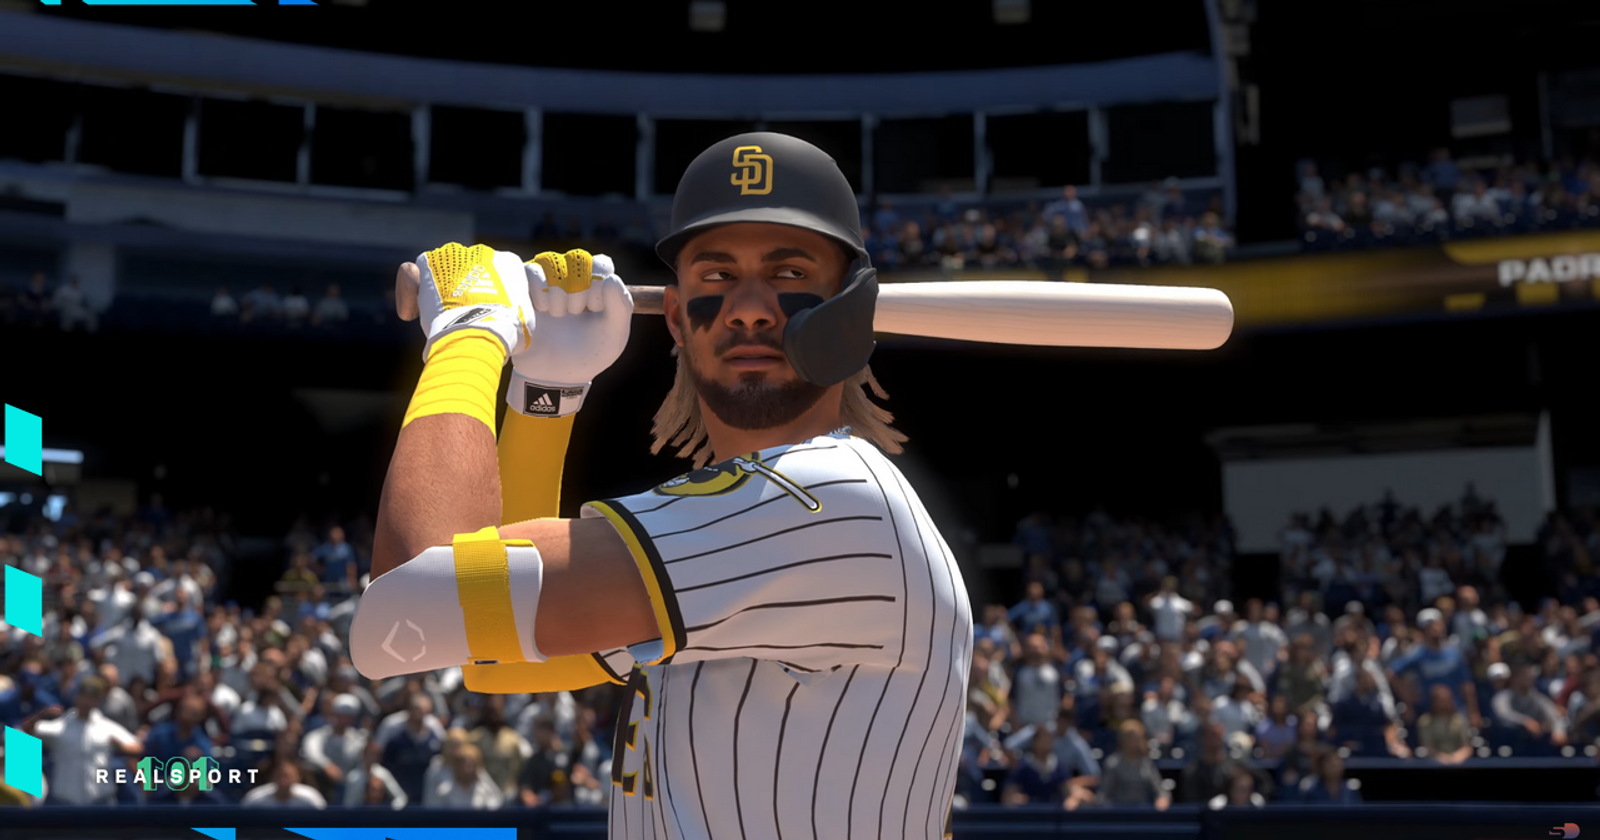 MLB The Show 21: 4th Inning Begins, Tips, Guide, Latest News, Review,  Platforms, Price, Cover Athlete & more